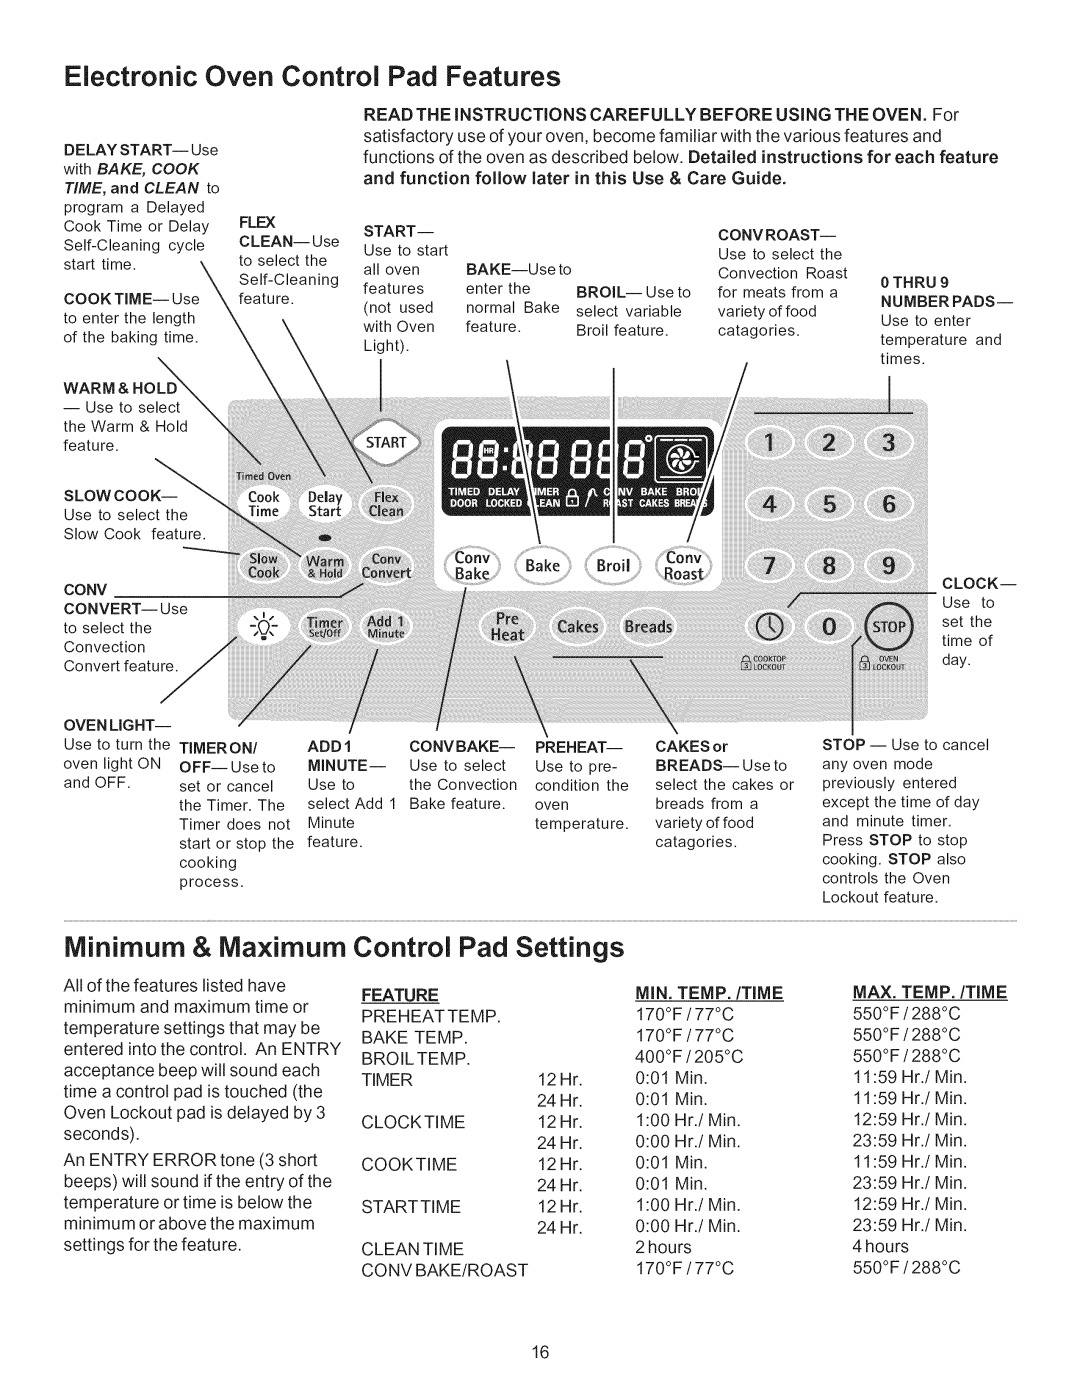 Kenmore 790.9662 Electronic Oven Control Pad Features, Minimum & Maximum, Pad Settings, Min. Temp./Time, Max. Temp./Time 